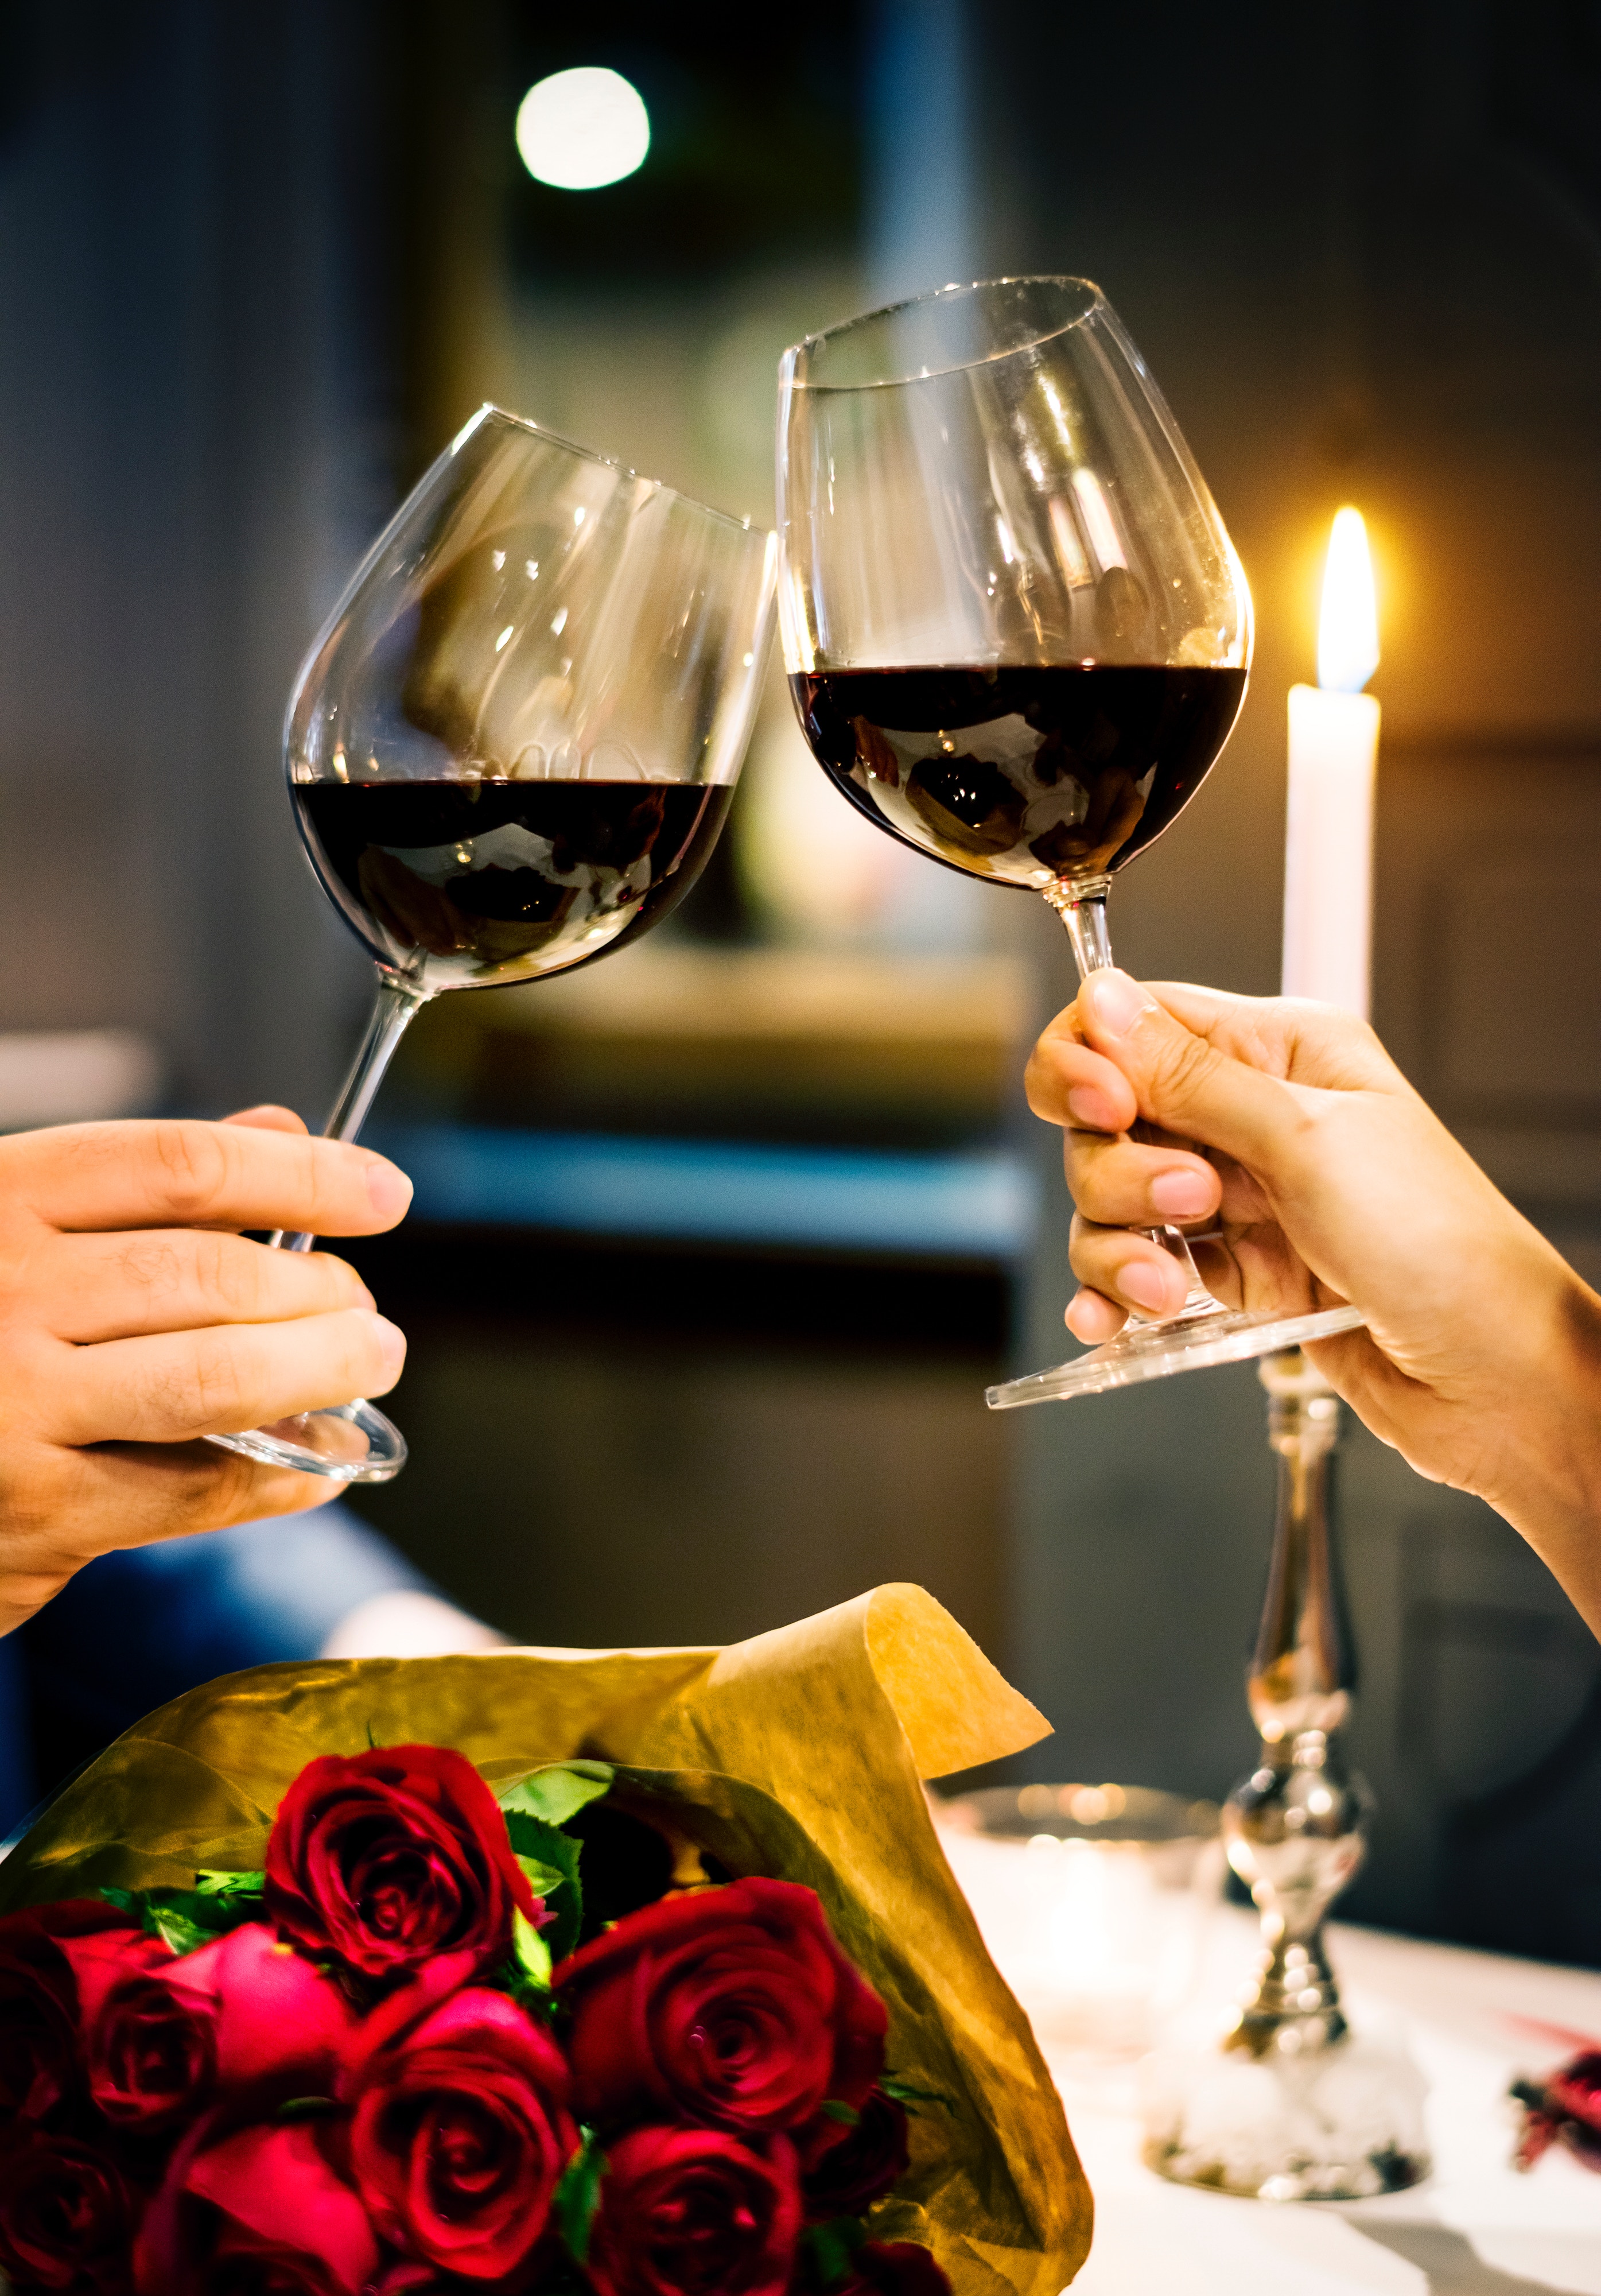 Two wine glasses clinking over a candlelight dinner